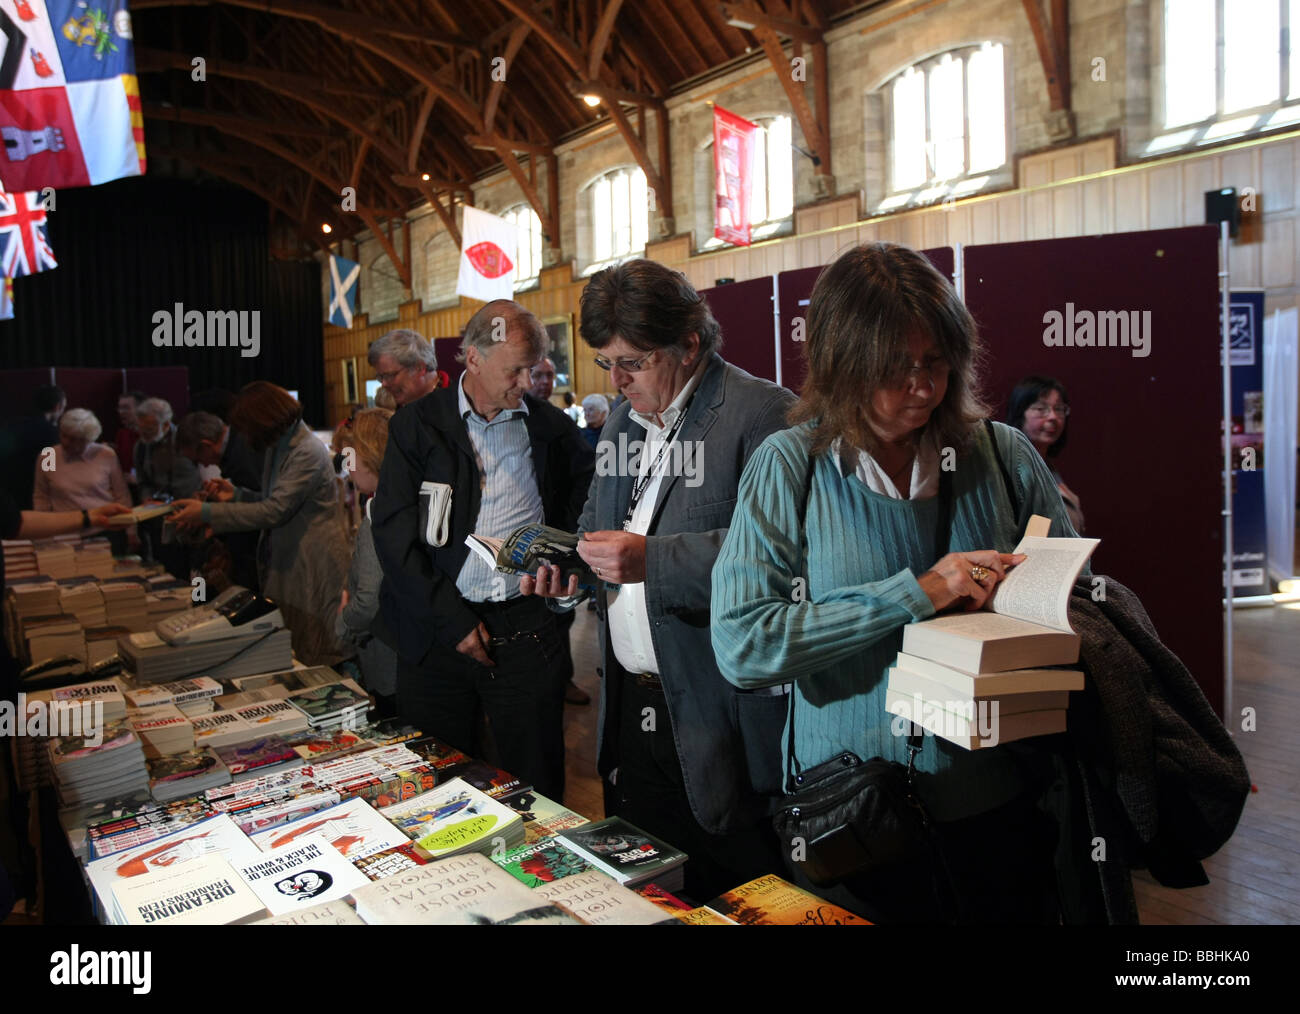 People queue to buy books at the Word Festival held at the University of Aberdeen, Scotland, Uk Stock Photo